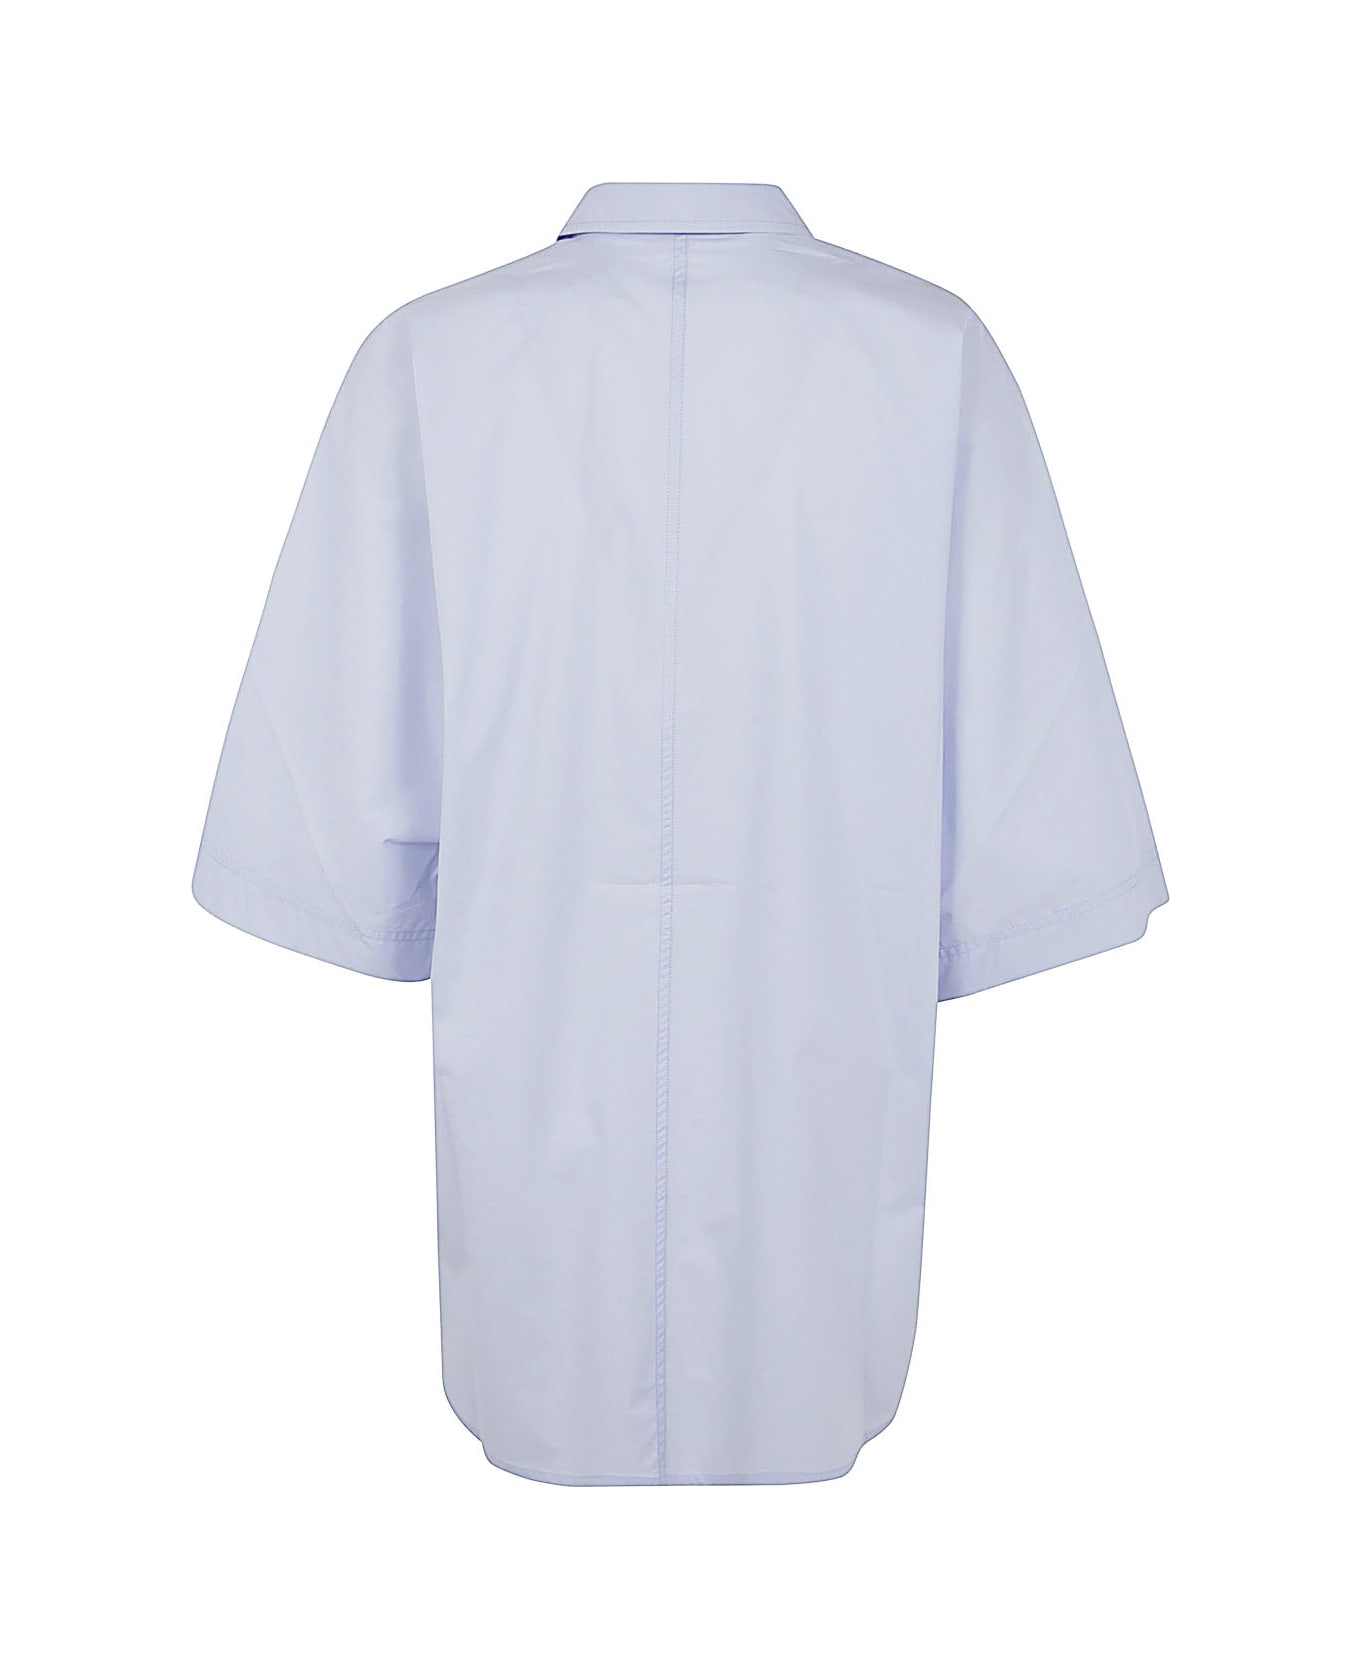 Sofie d'Hoore Short Sleeve Shirt With Front Placket - Waterfall シャツ